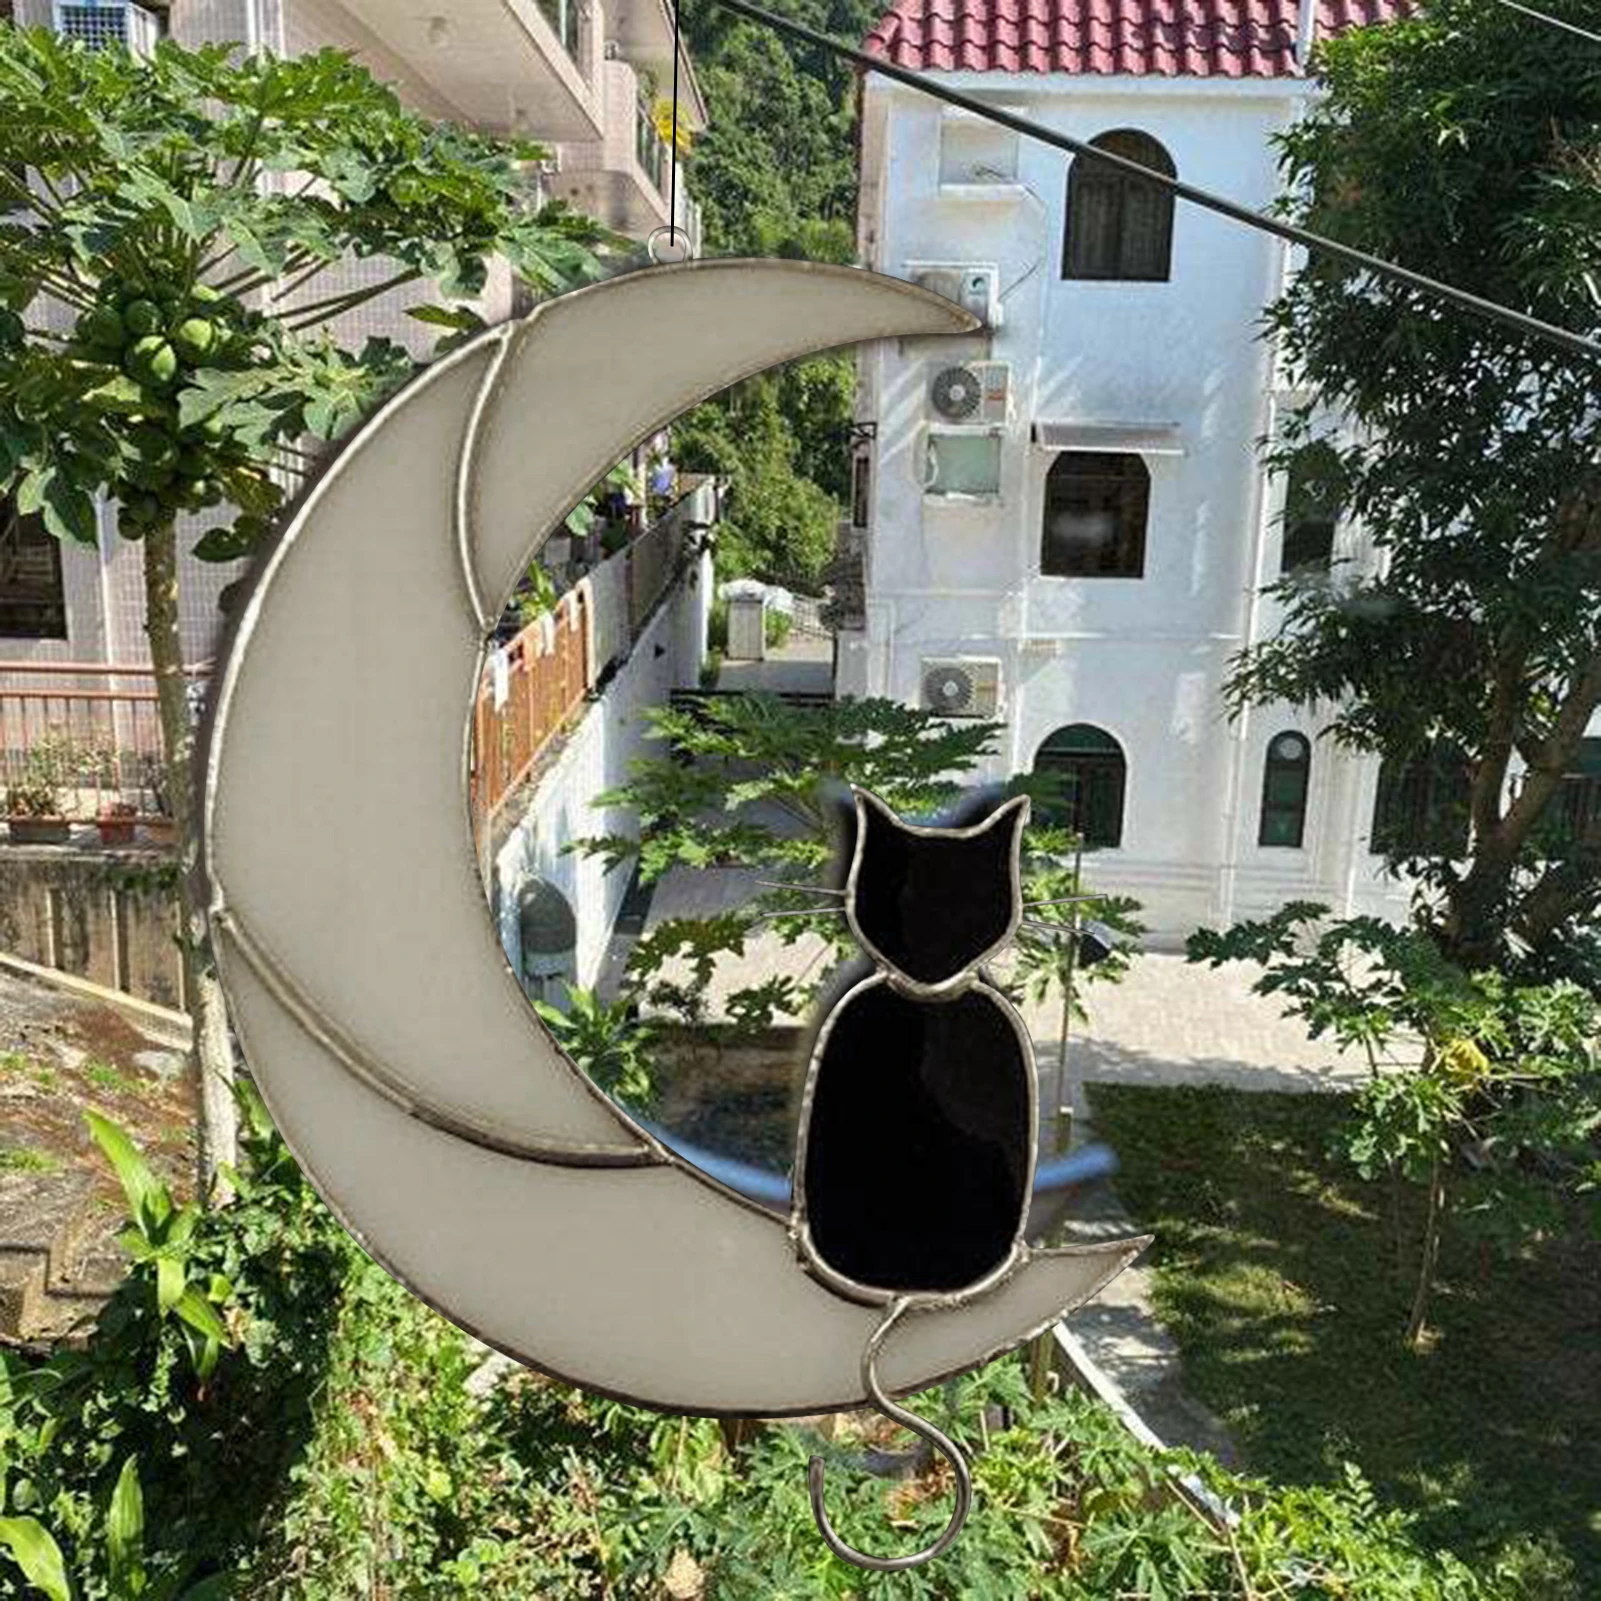 Ouwuo Cat On The Moon Hanging Suncatcher Stained Glass Lover Gift Pet Gift Black Cat On The Moon Home Decor Ornament Cute Cat